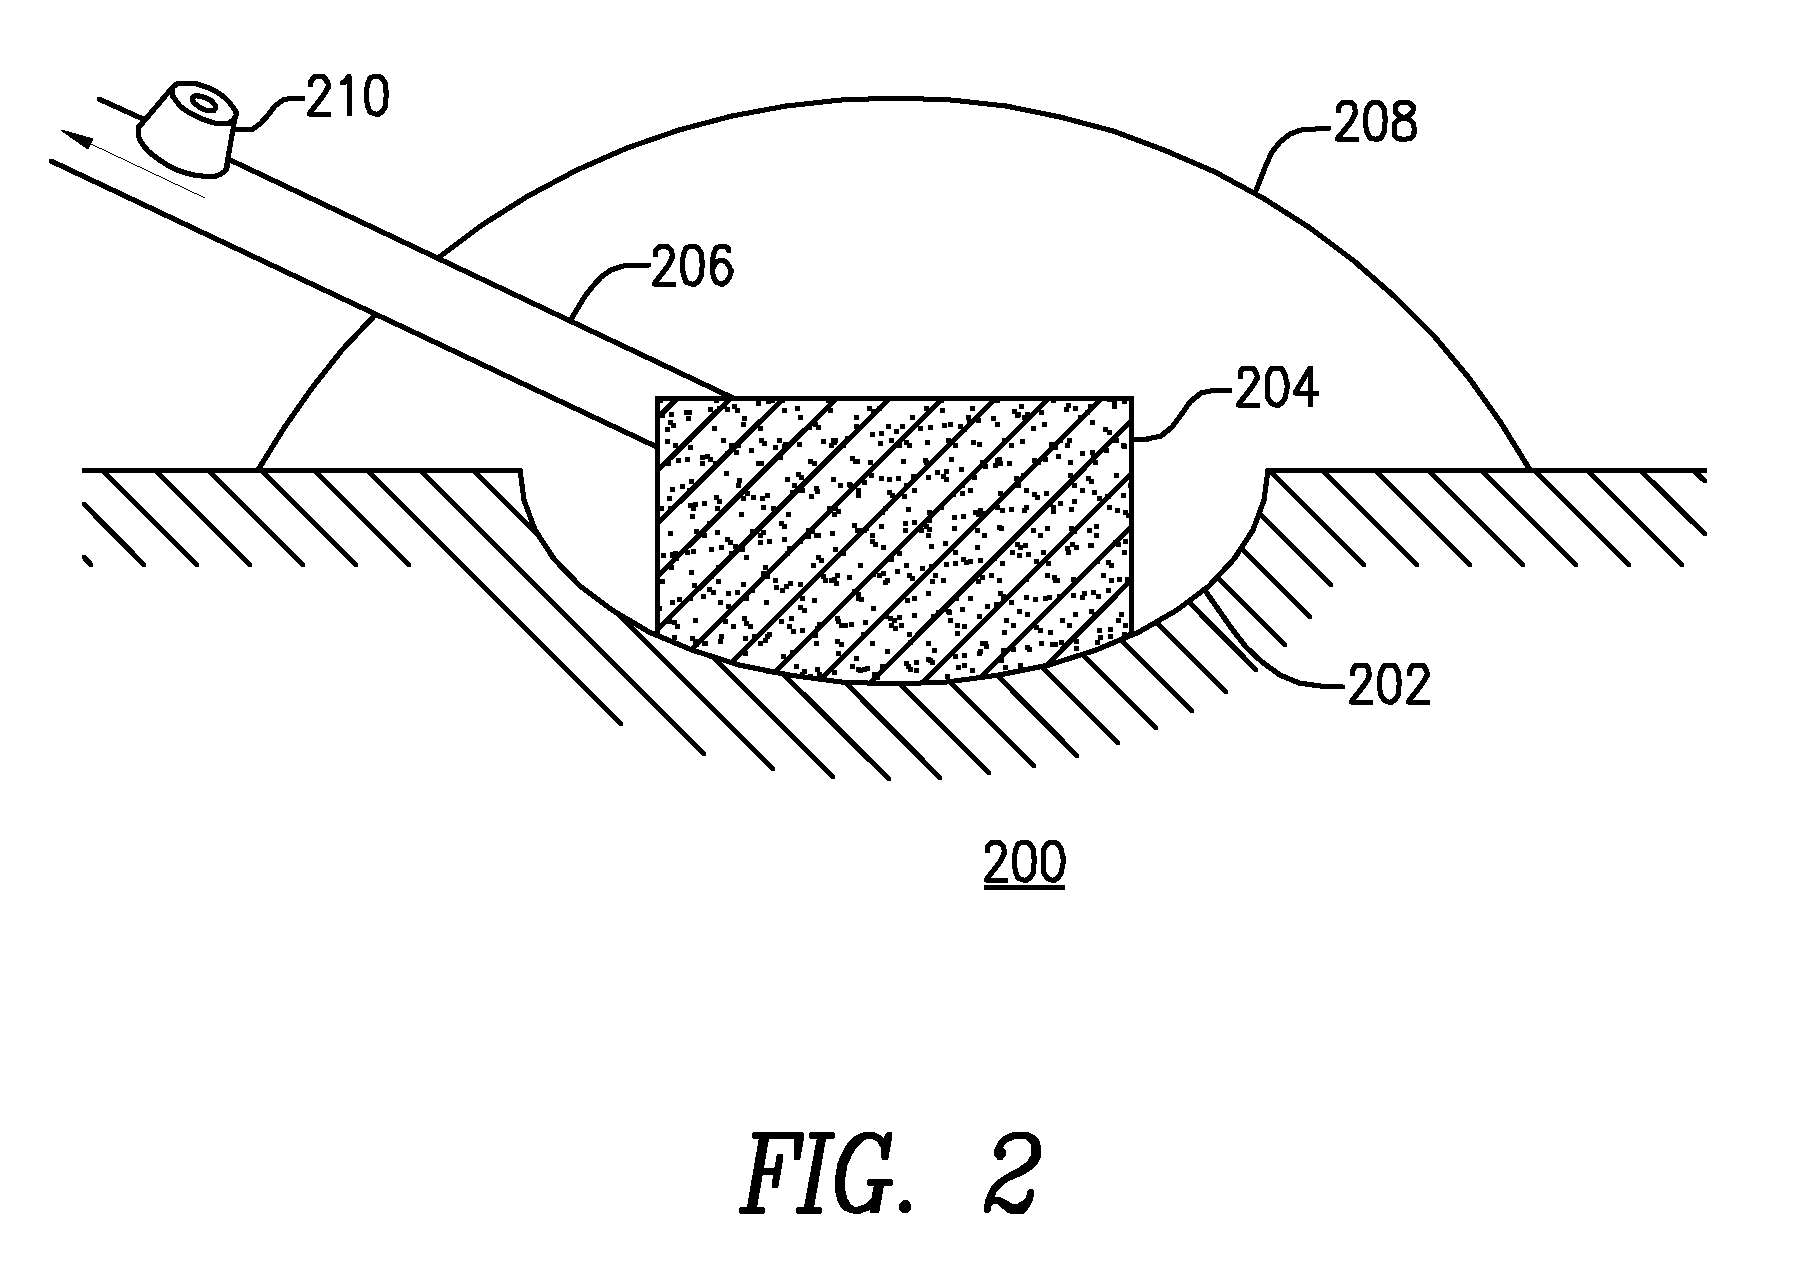 Systems and methods for providing a debriding wound vacuum